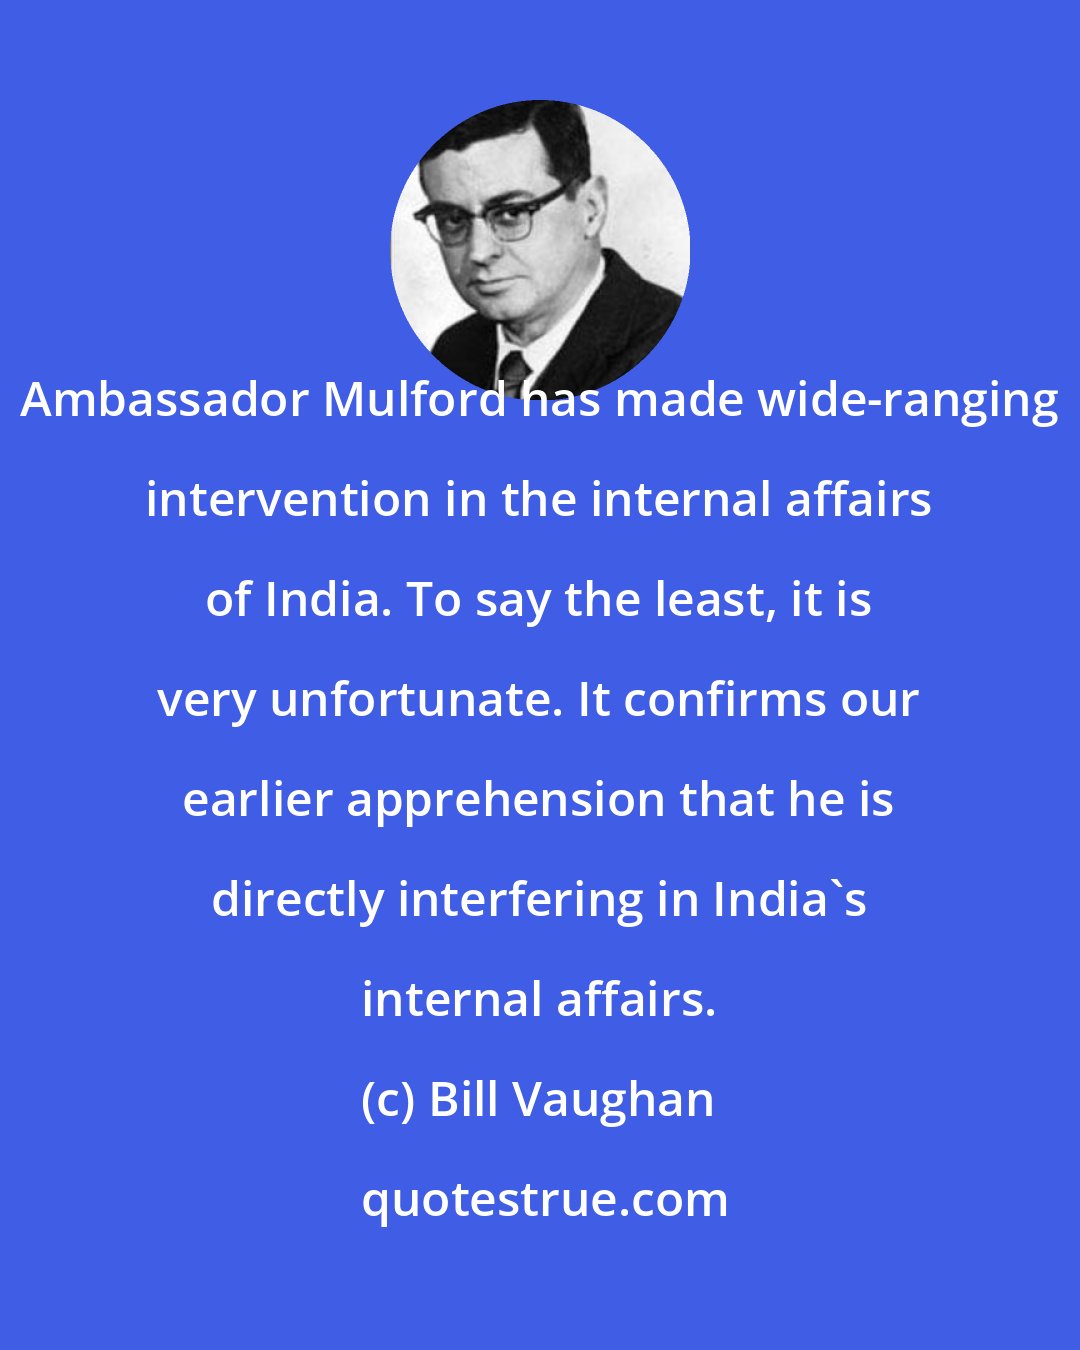 Bill Vaughan: Ambassador Mulford has made wide-ranging intervention in the internal affairs of India. To say the least, it is very unfortunate. It confirms our earlier apprehension that he is directly interfering in India's internal affairs.